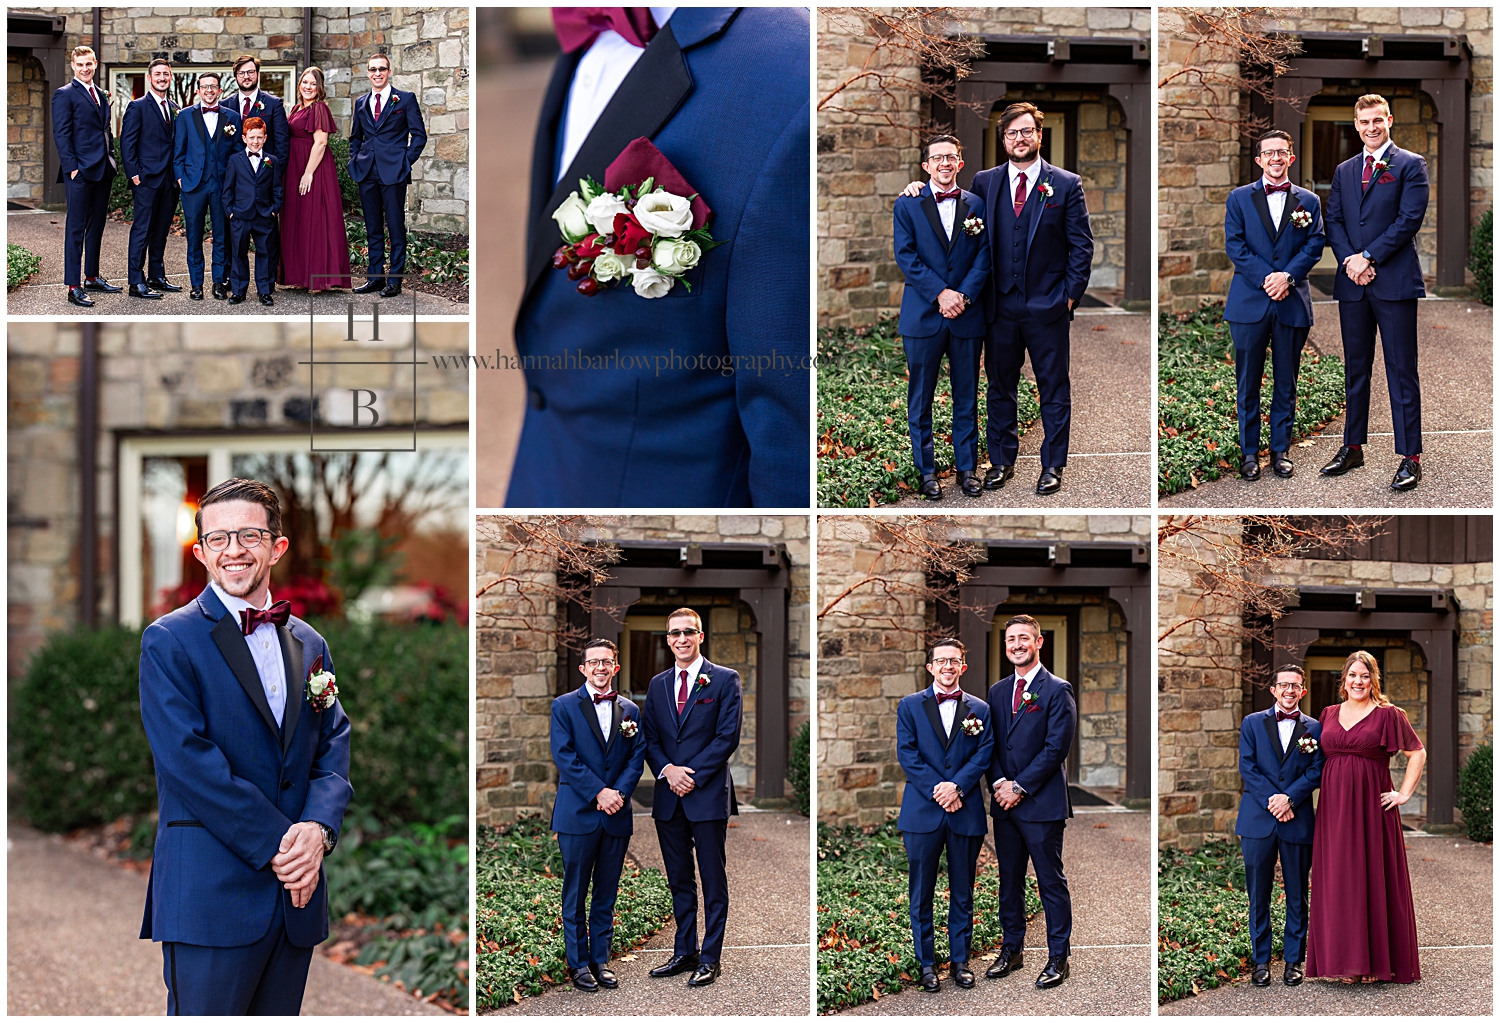 Groom in navy poses with groomsmen and friend